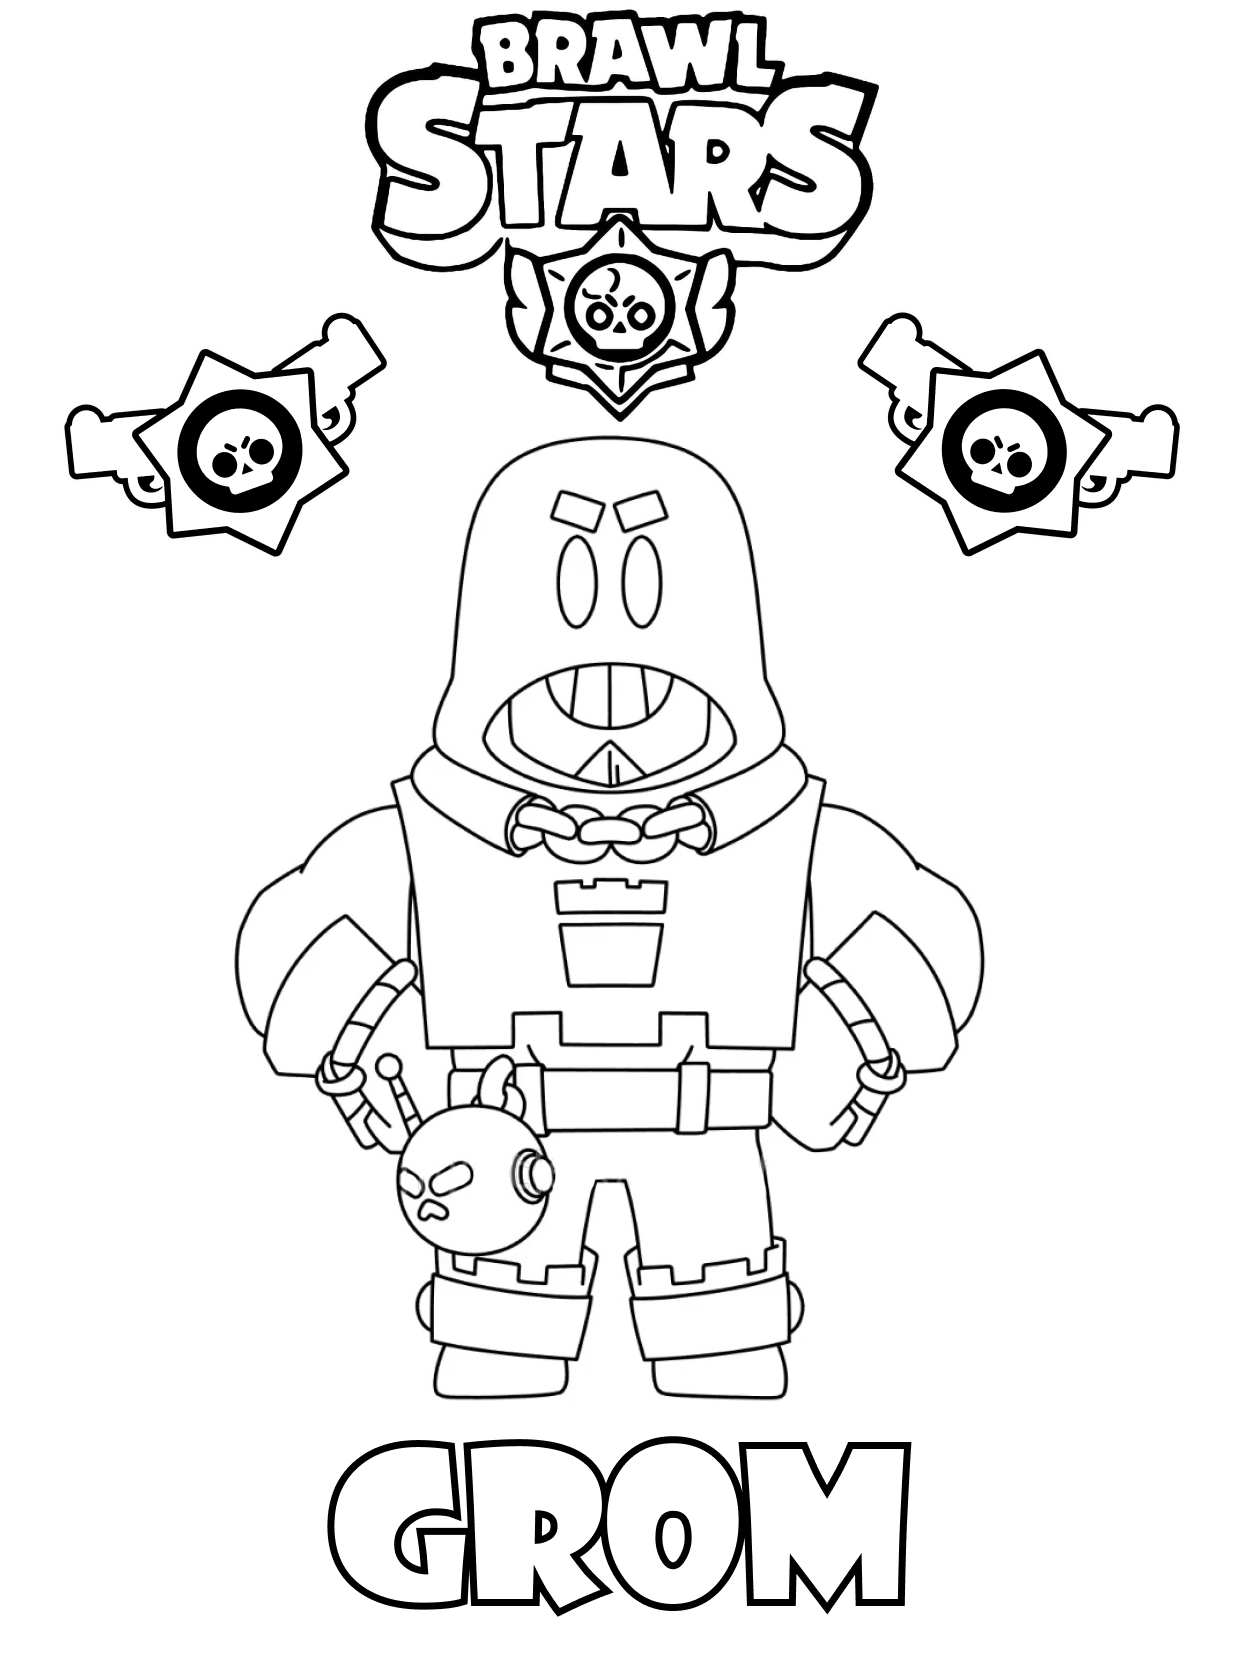 Coloring page Brawl Stars Grom